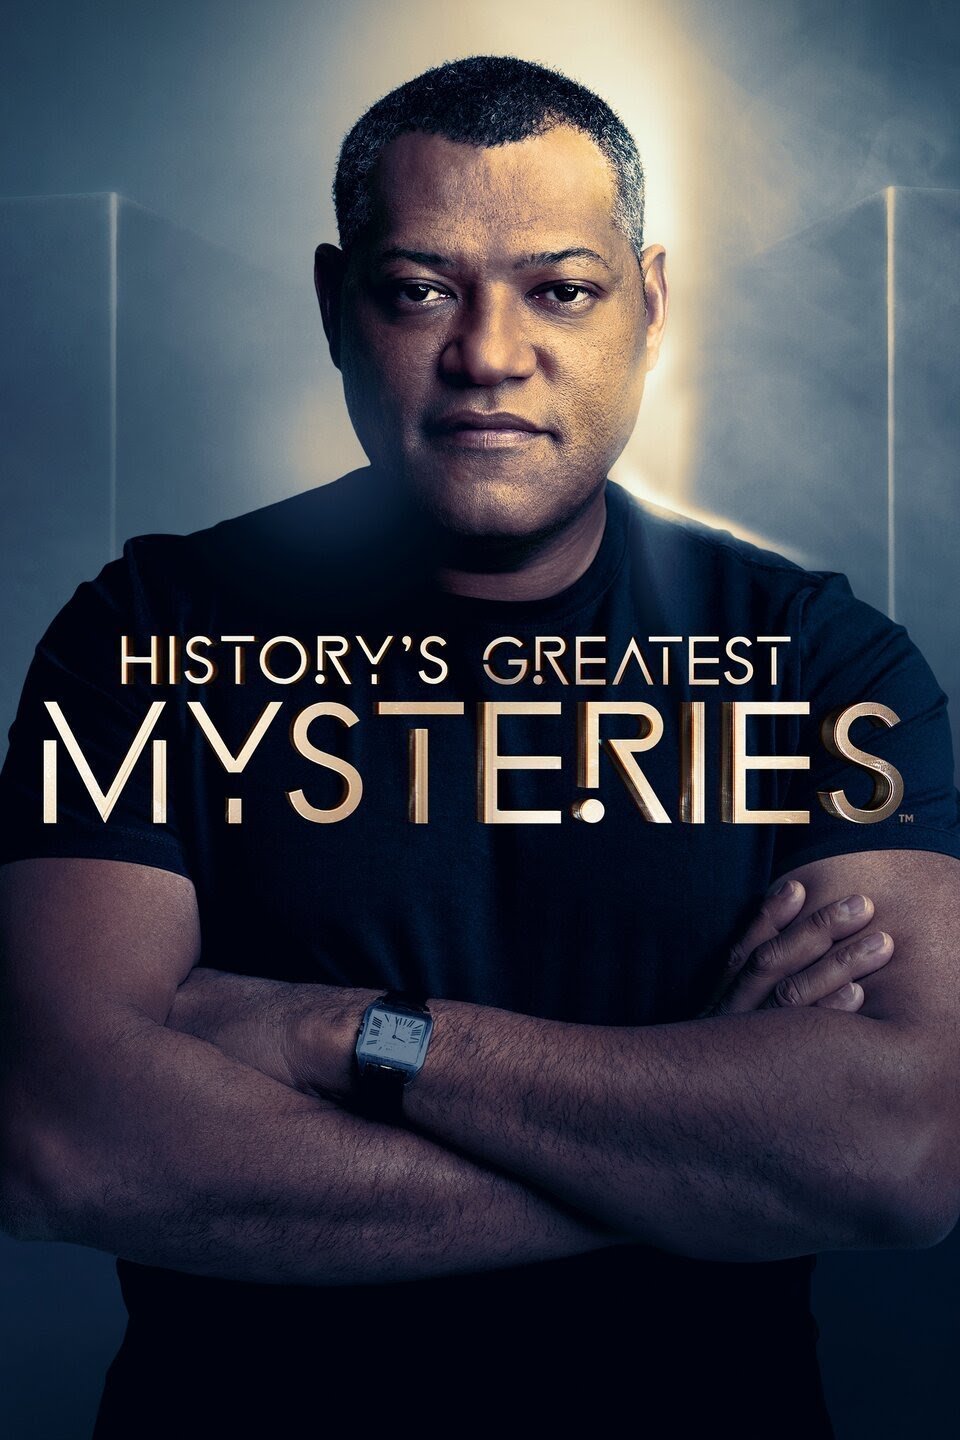 Poster of the movie History's Greatest Mysteries